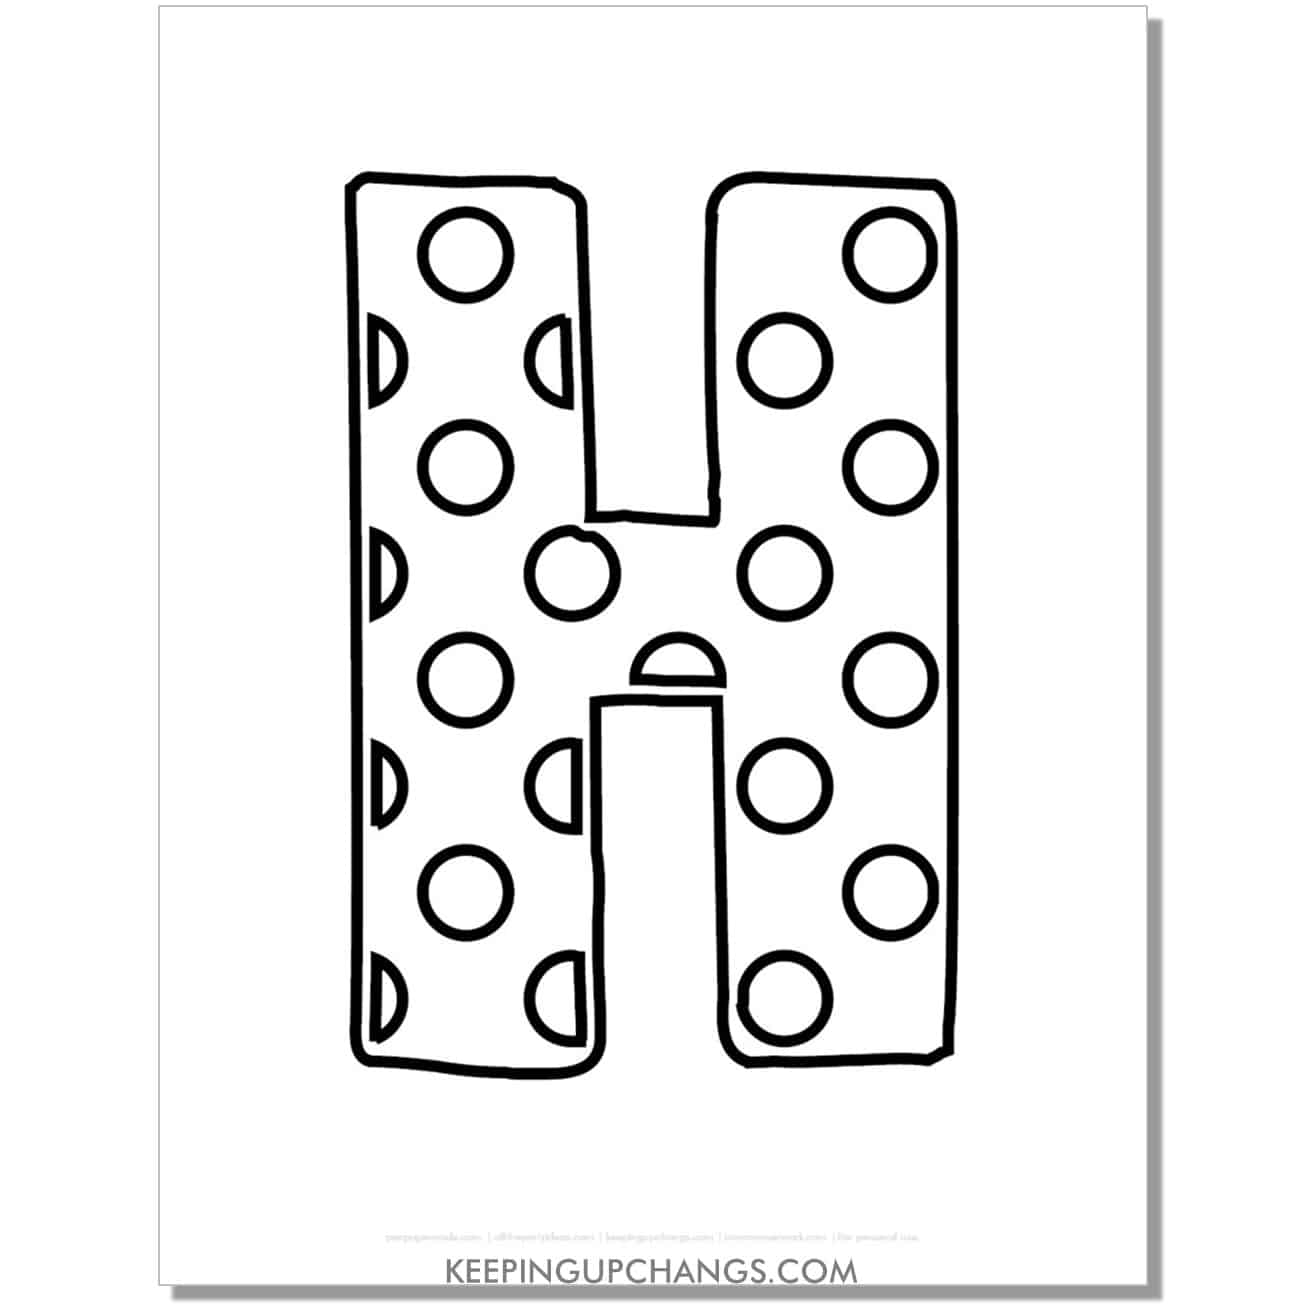 free alphabet letter h coloring page with polka dots for toddlers, preschool, kindergarten.